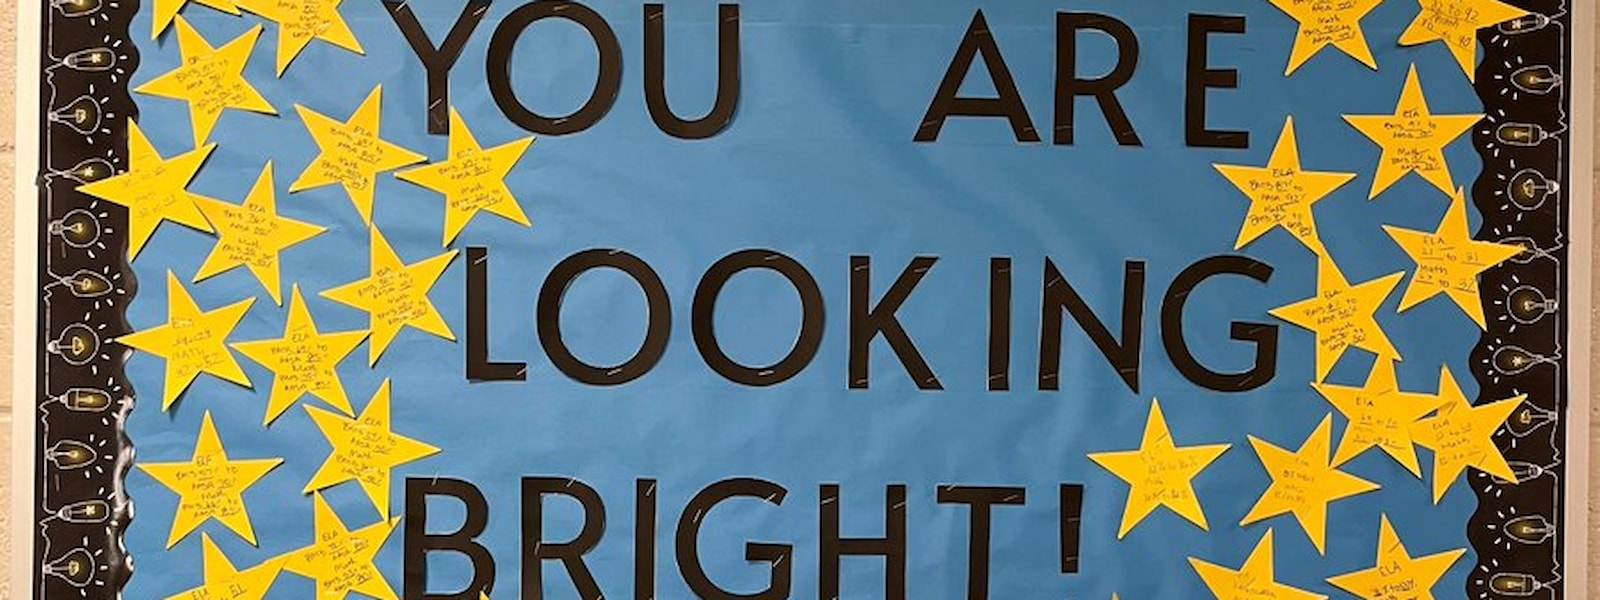 Bulletin Board - you are looking bright with stars